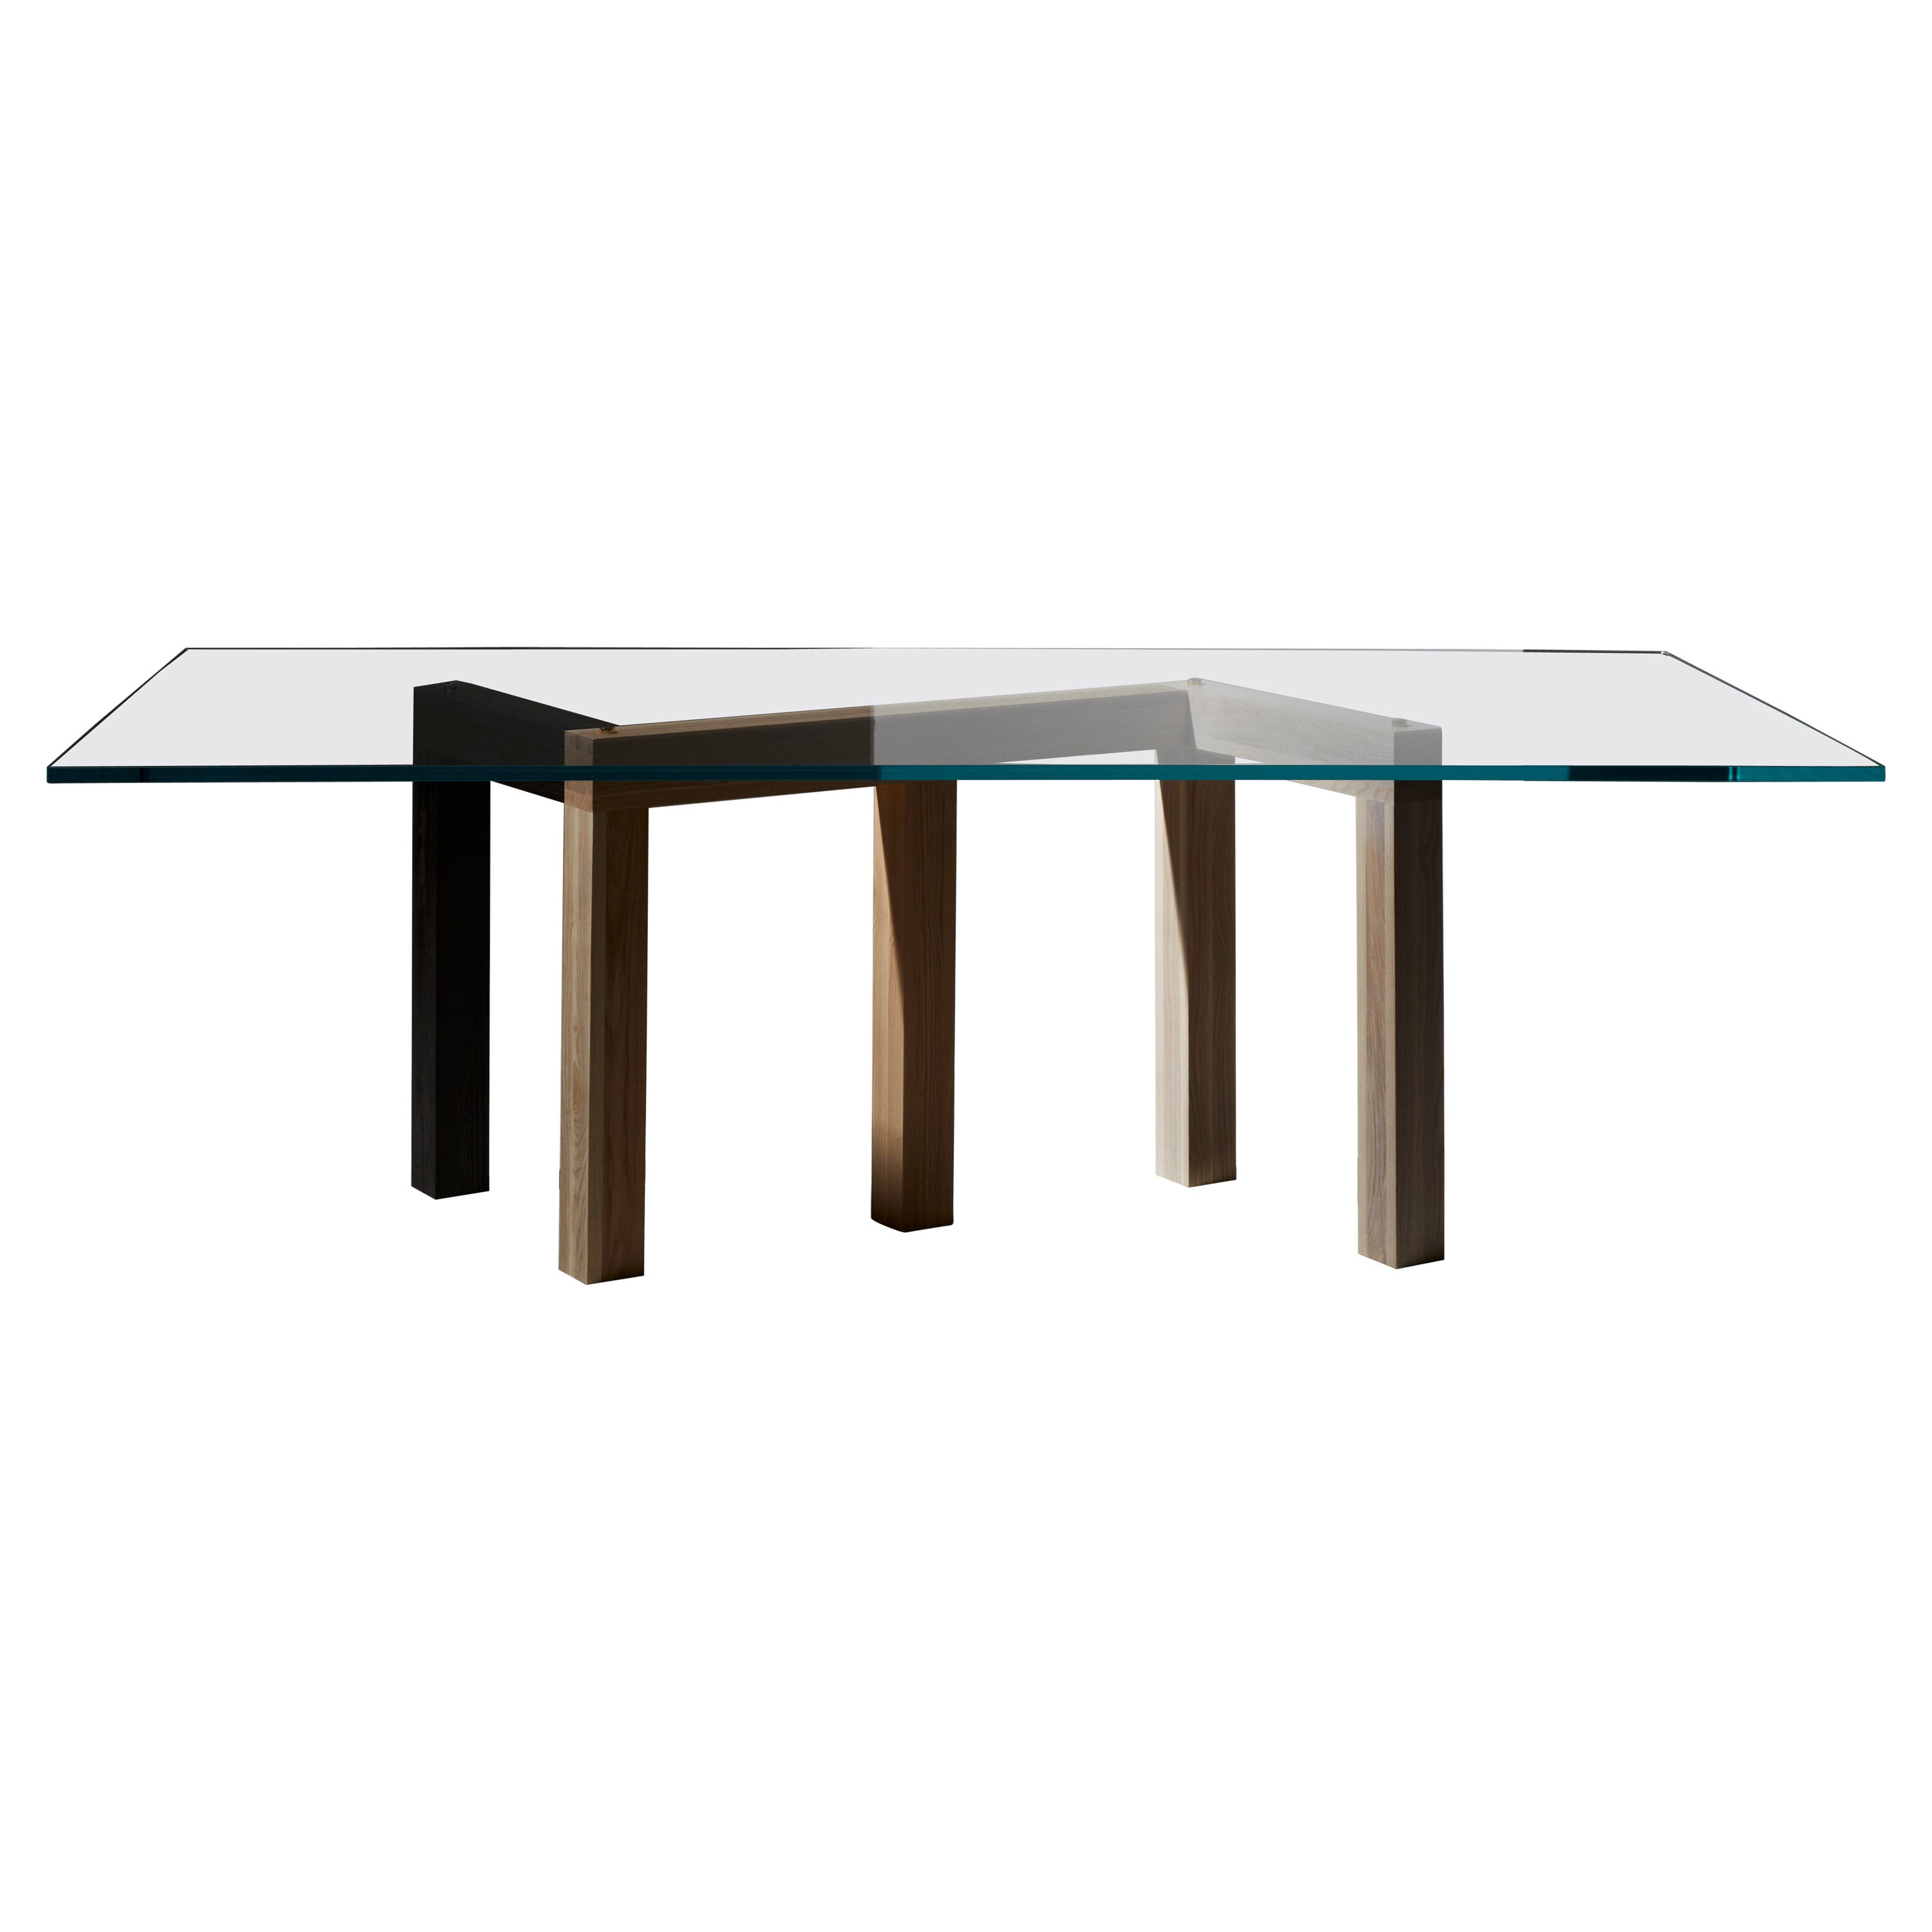 Penrose Dinner Table, Ash Legs, Clear Glass, by Hayo Gebauer for La Chance